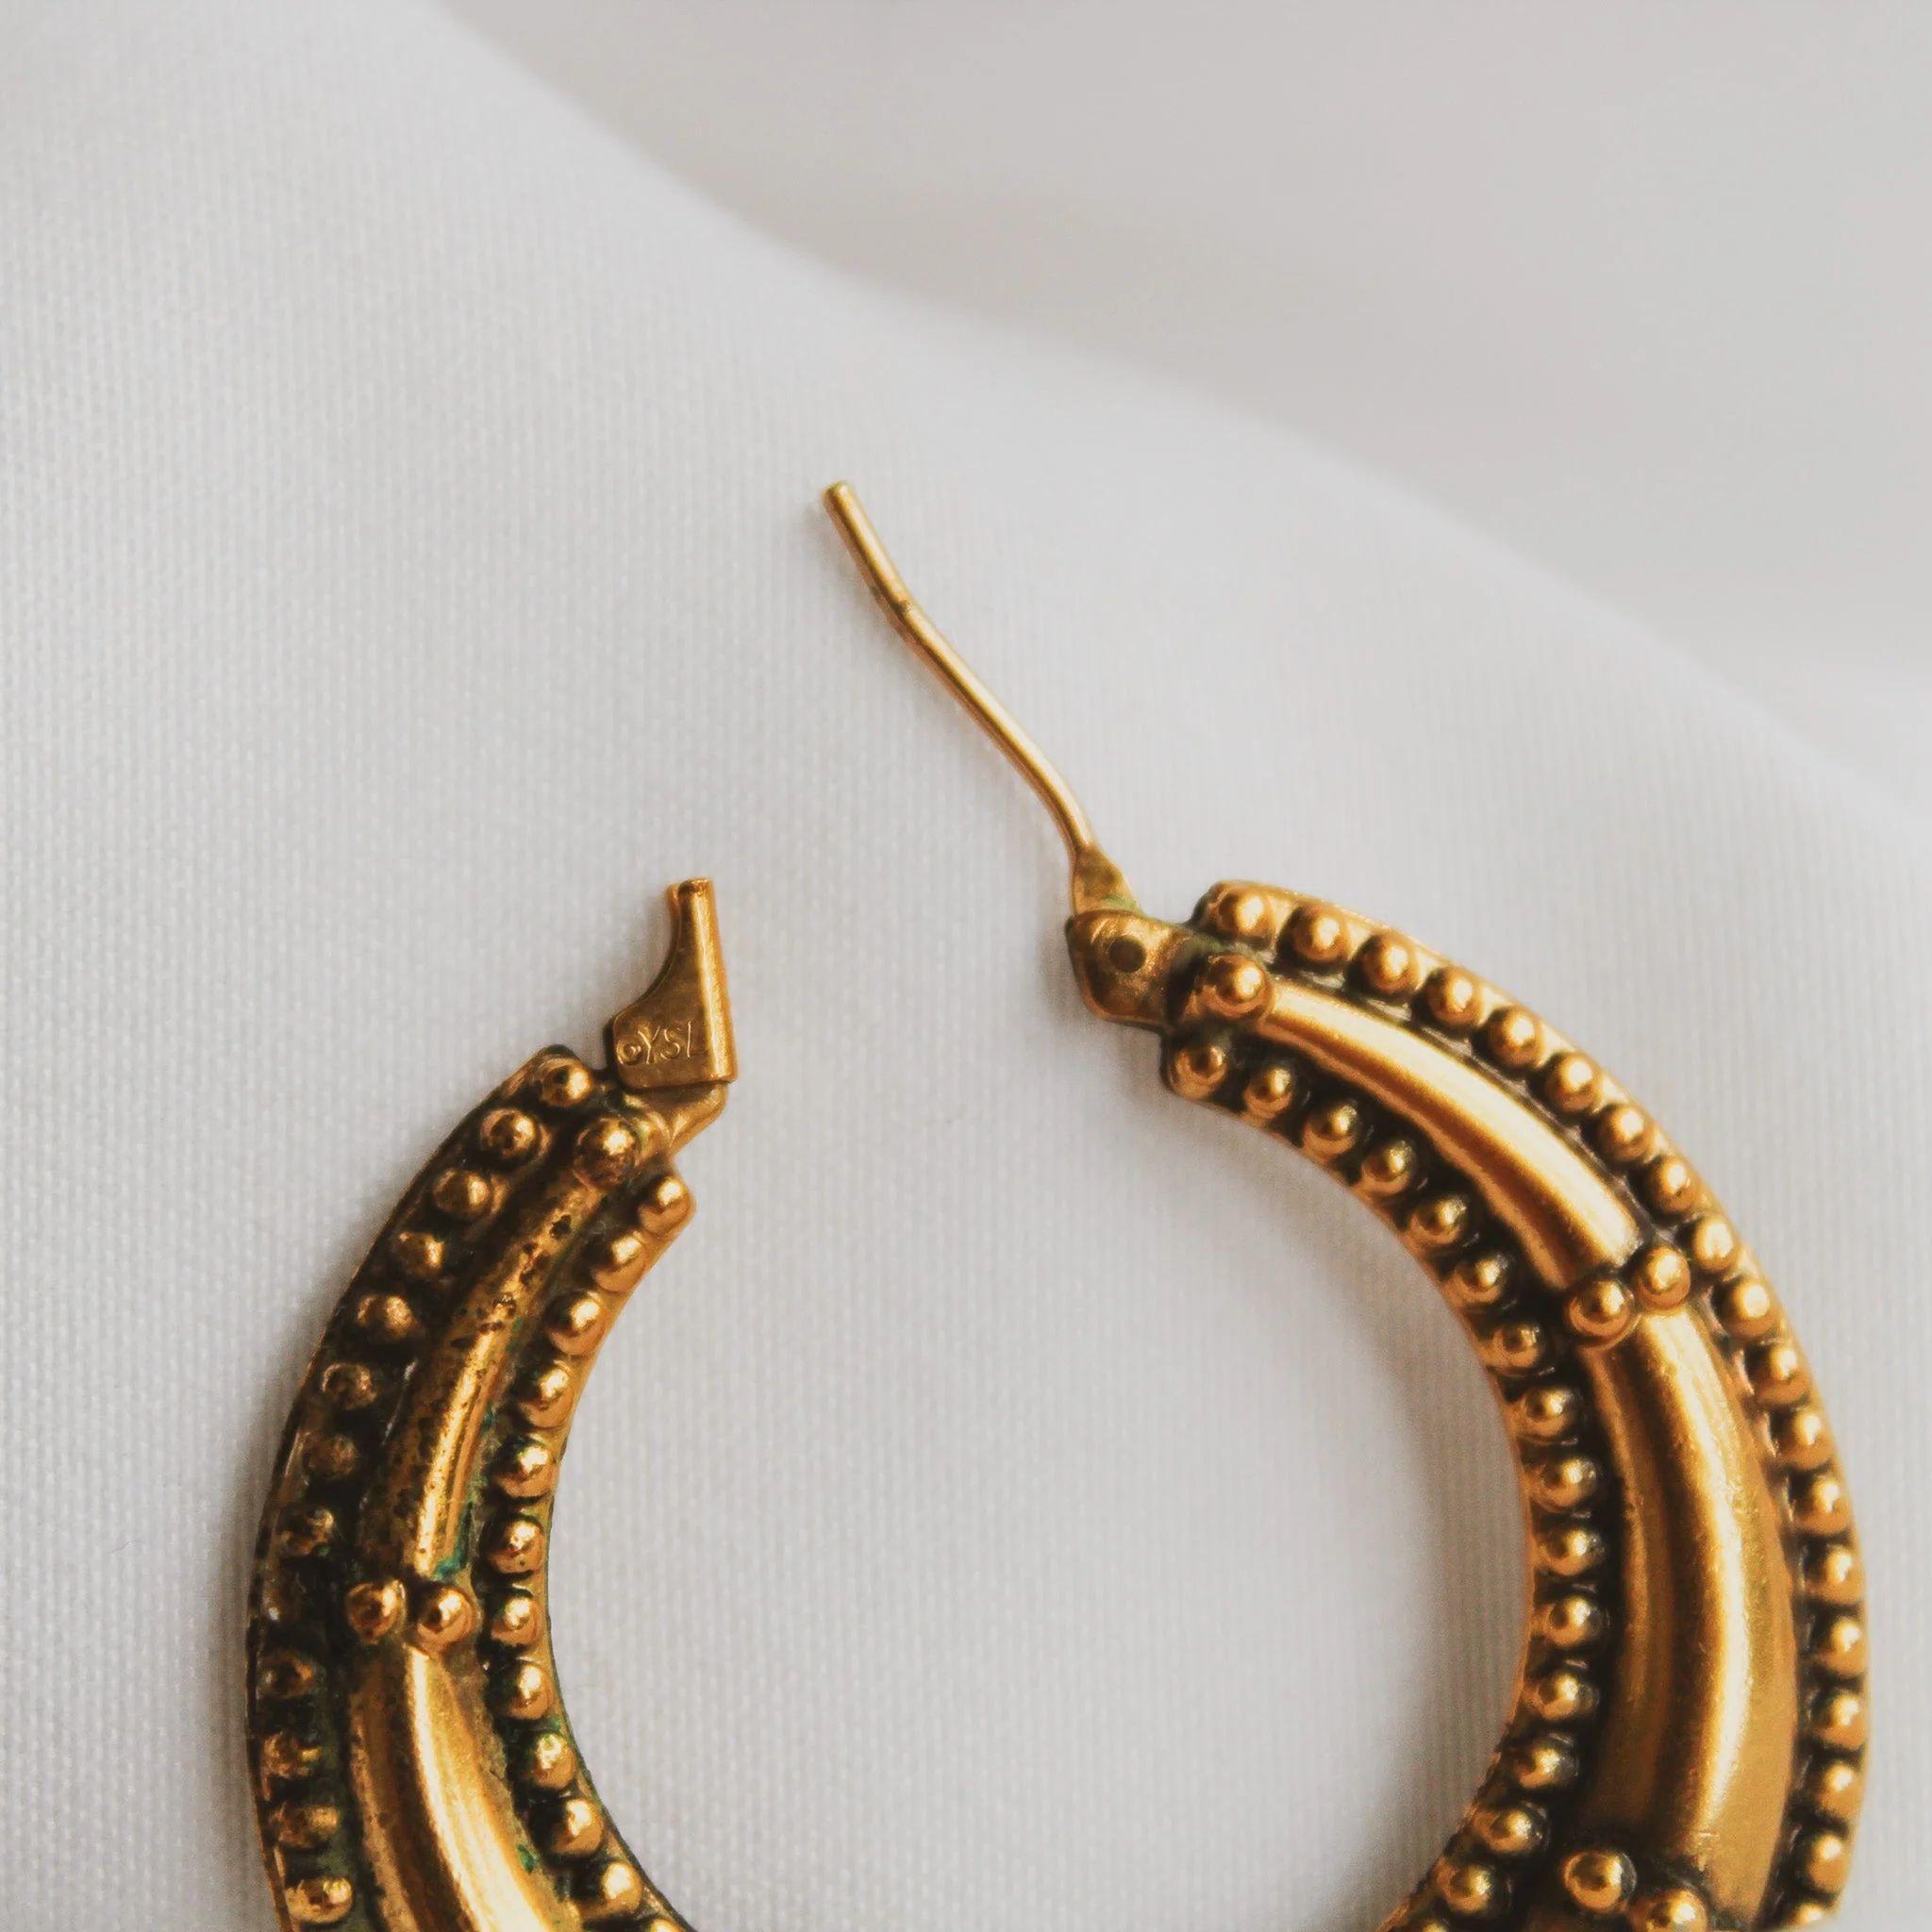 Vintage Yves Saint Laurent 1990s Hoop Earrings for Pierced Ears

Step into the world of vintage fashion with these stunning Yves Saint Laurent 1990s Hoop Earrings. These gold-plated earrings showcase intricate detailing that is sure to turn heads.